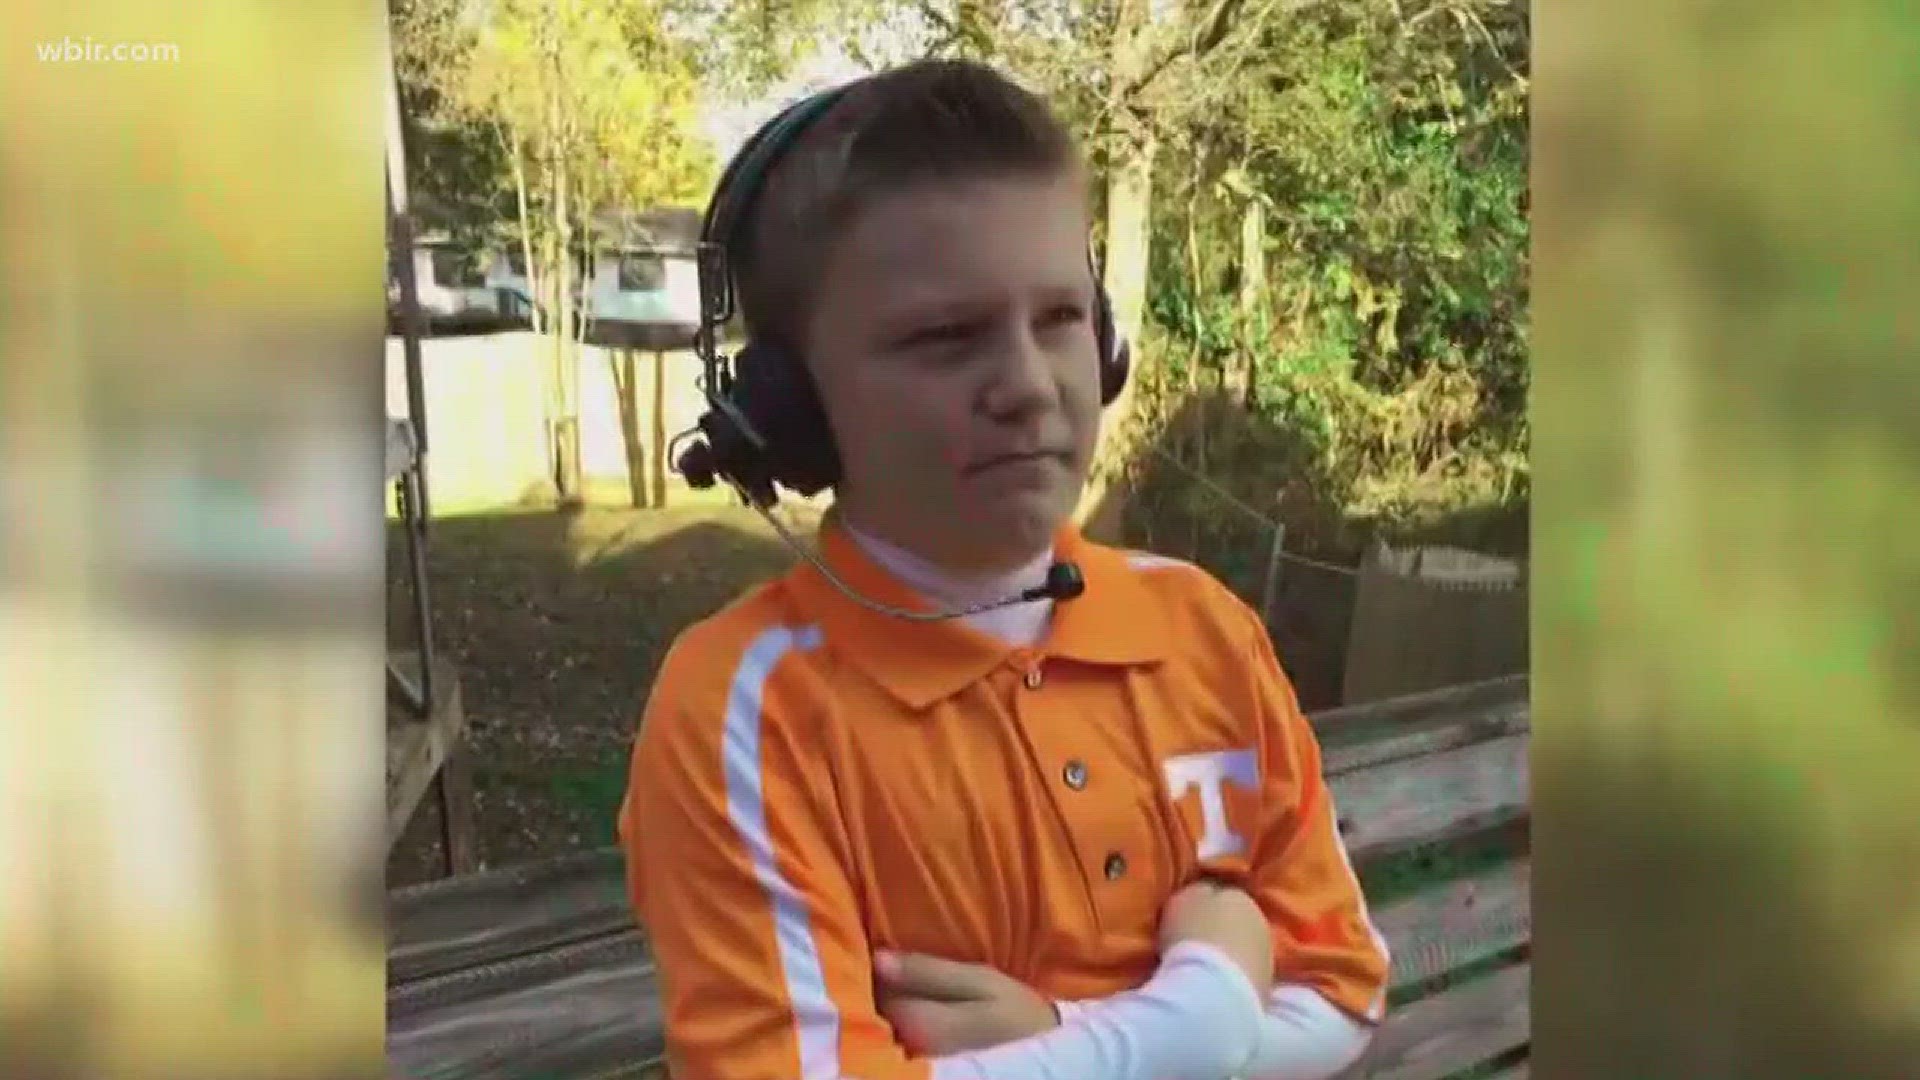 The news of Butch Jones being fired from UT sent waves through the college football world, but for one twelve-year-old, the news hit especially hard.